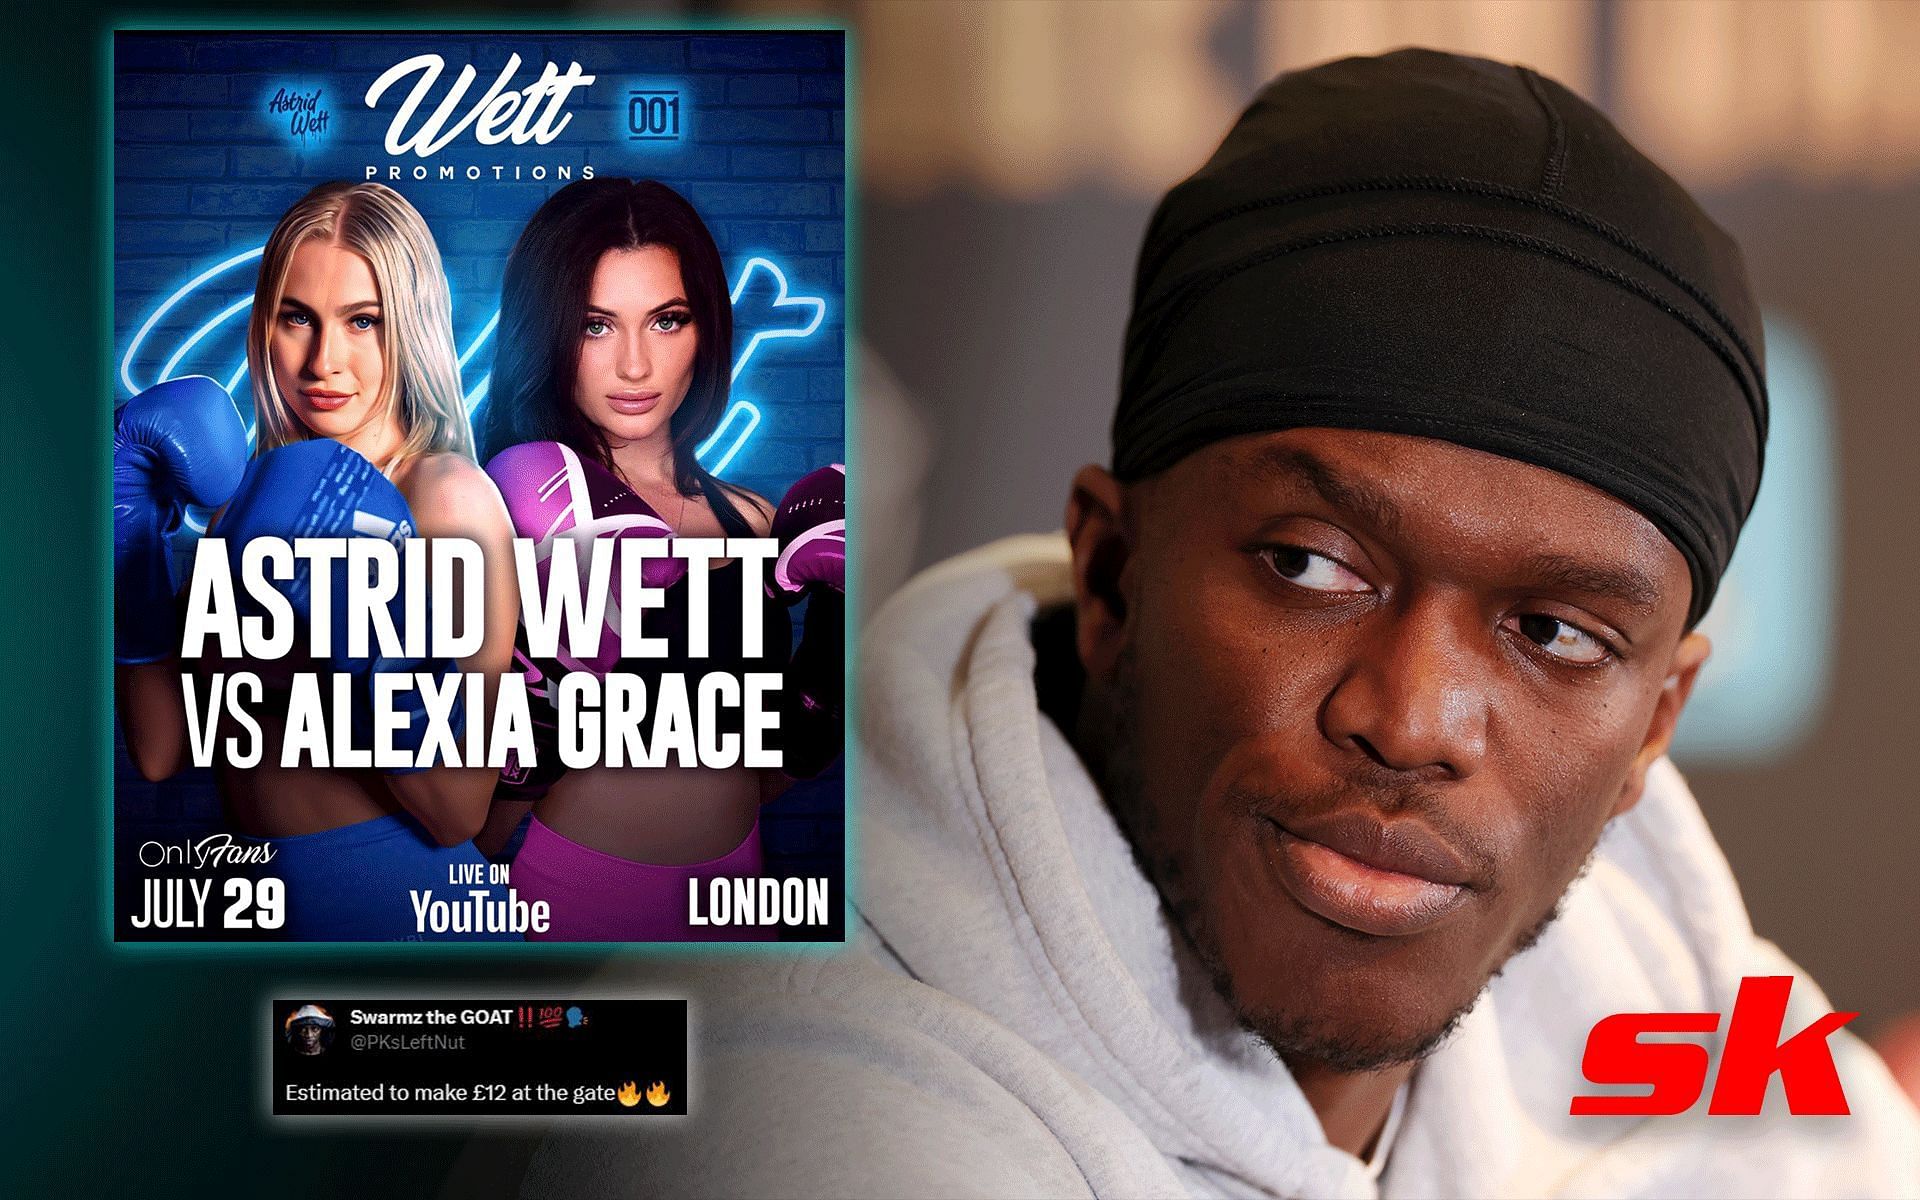 Astrid Wett vs. Alexia Grace poster (left) and KSI (right) [Image credits: Getty Images and @IfnBoxing on Twitter ]